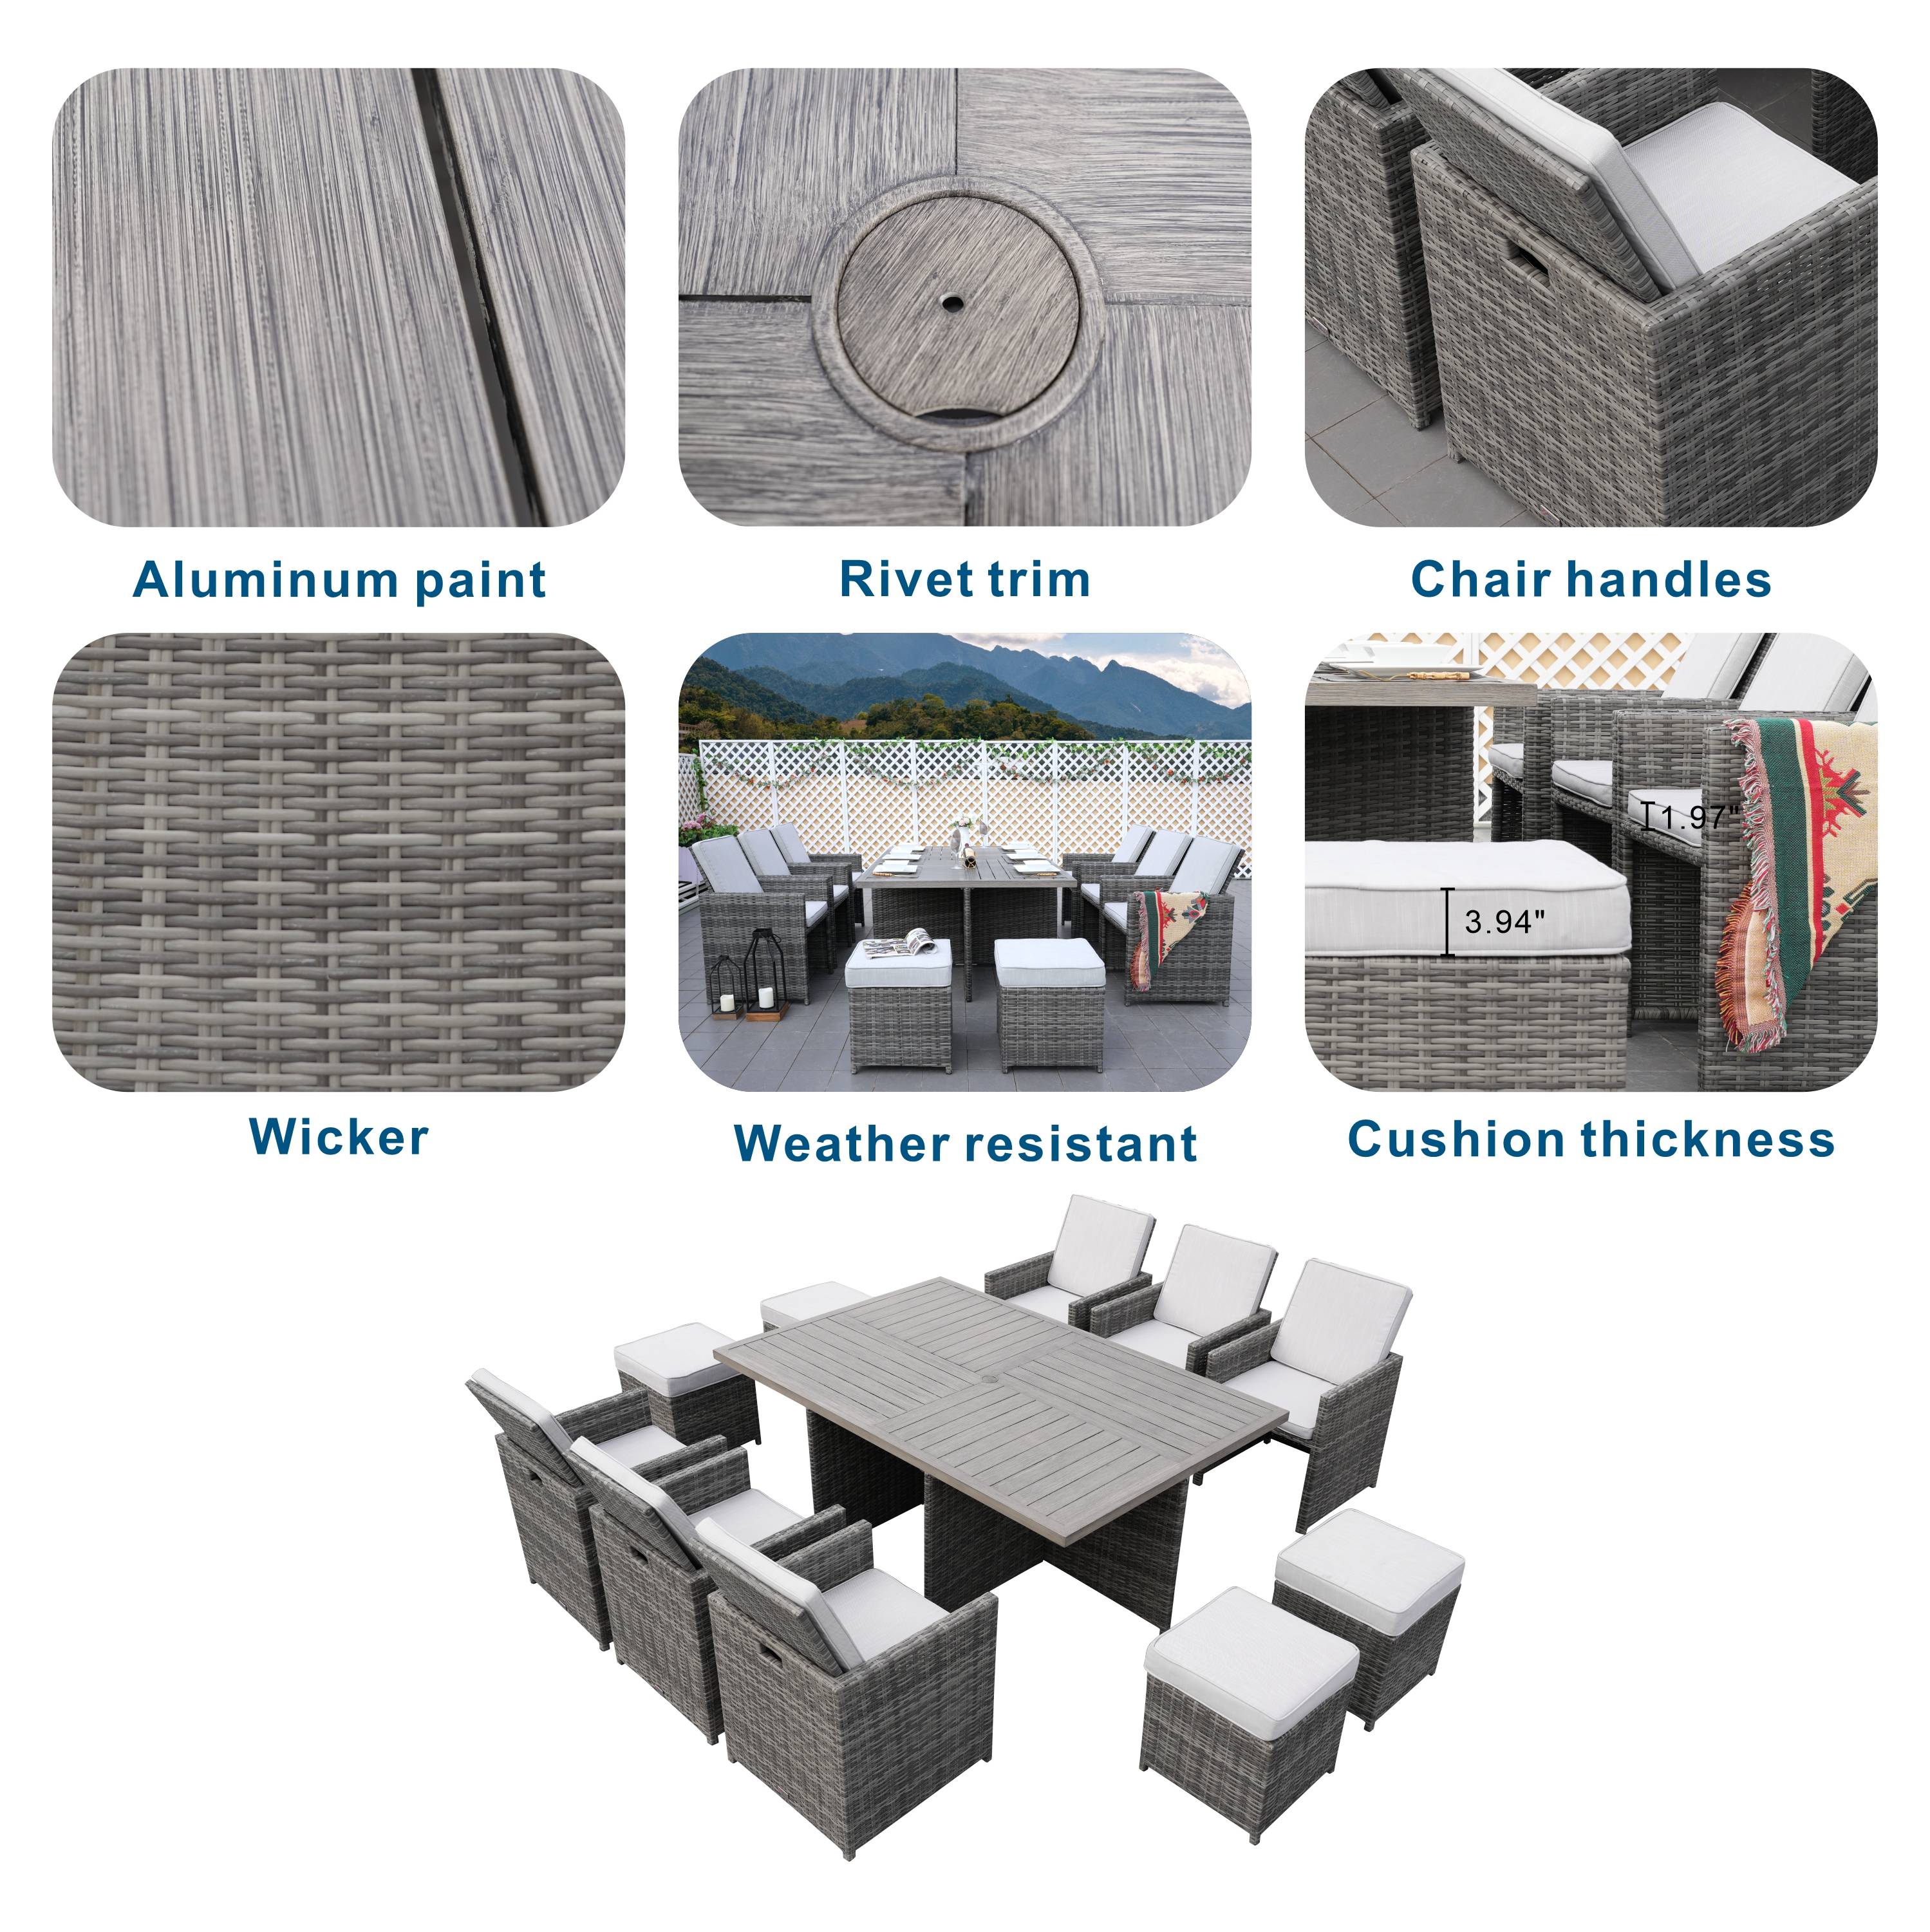 Abrihome 11-Piece Patio Outdoor Wicker Dining Set with Aluminum Table